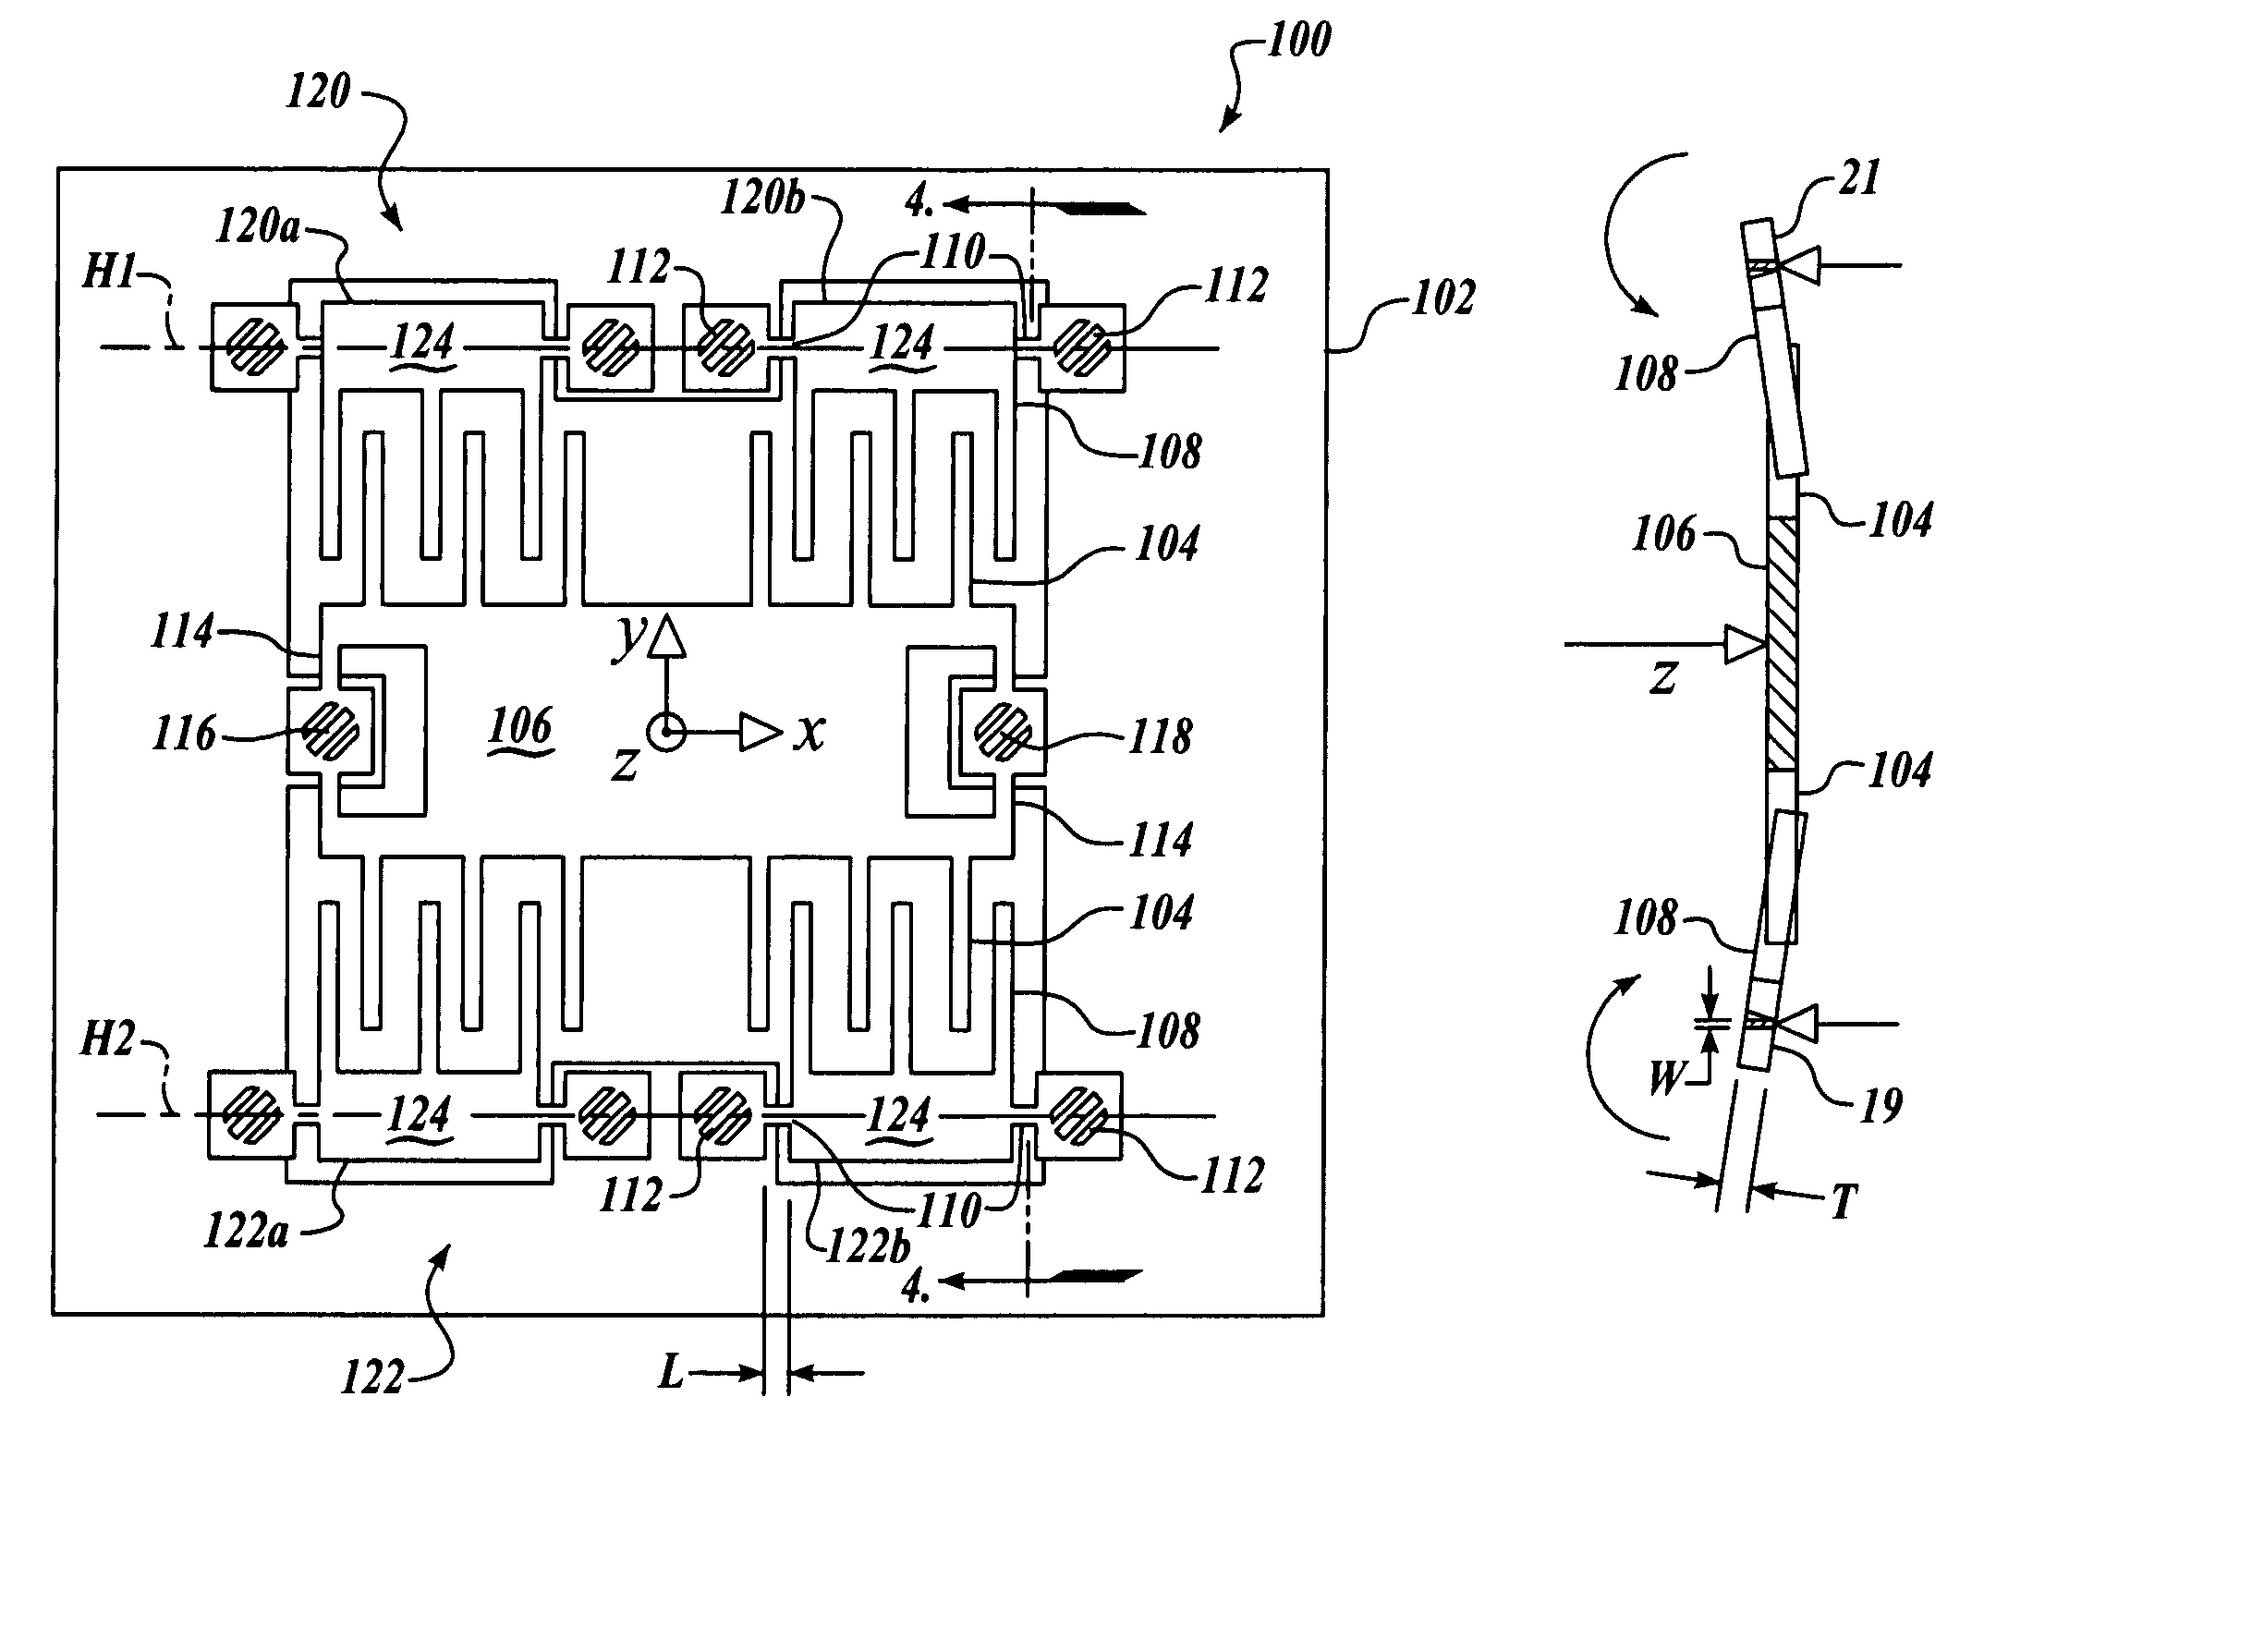 Out-of-plane compensation suspension for an accelerometer